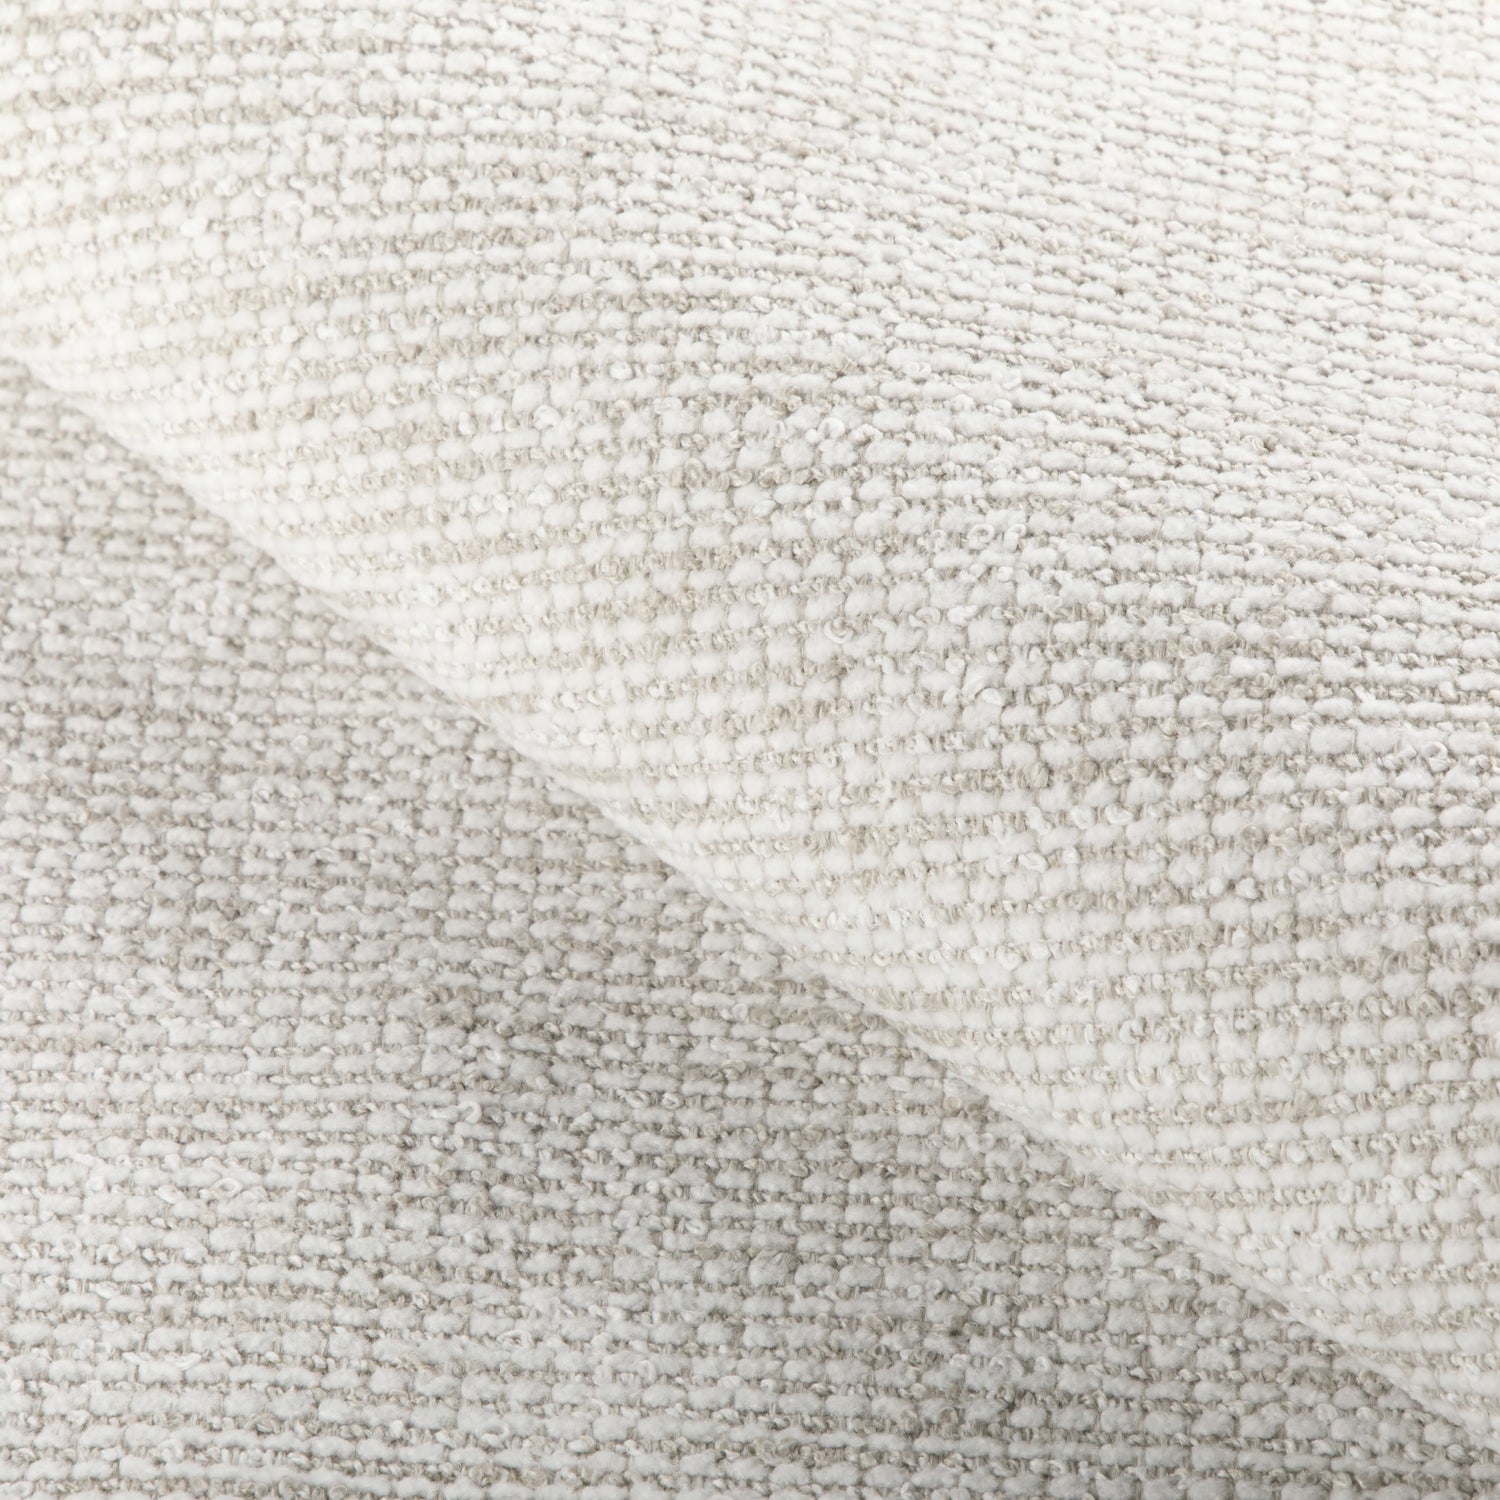 Kravet Couture Beach Dune fabric in ivory color - pattern 36929.116.0